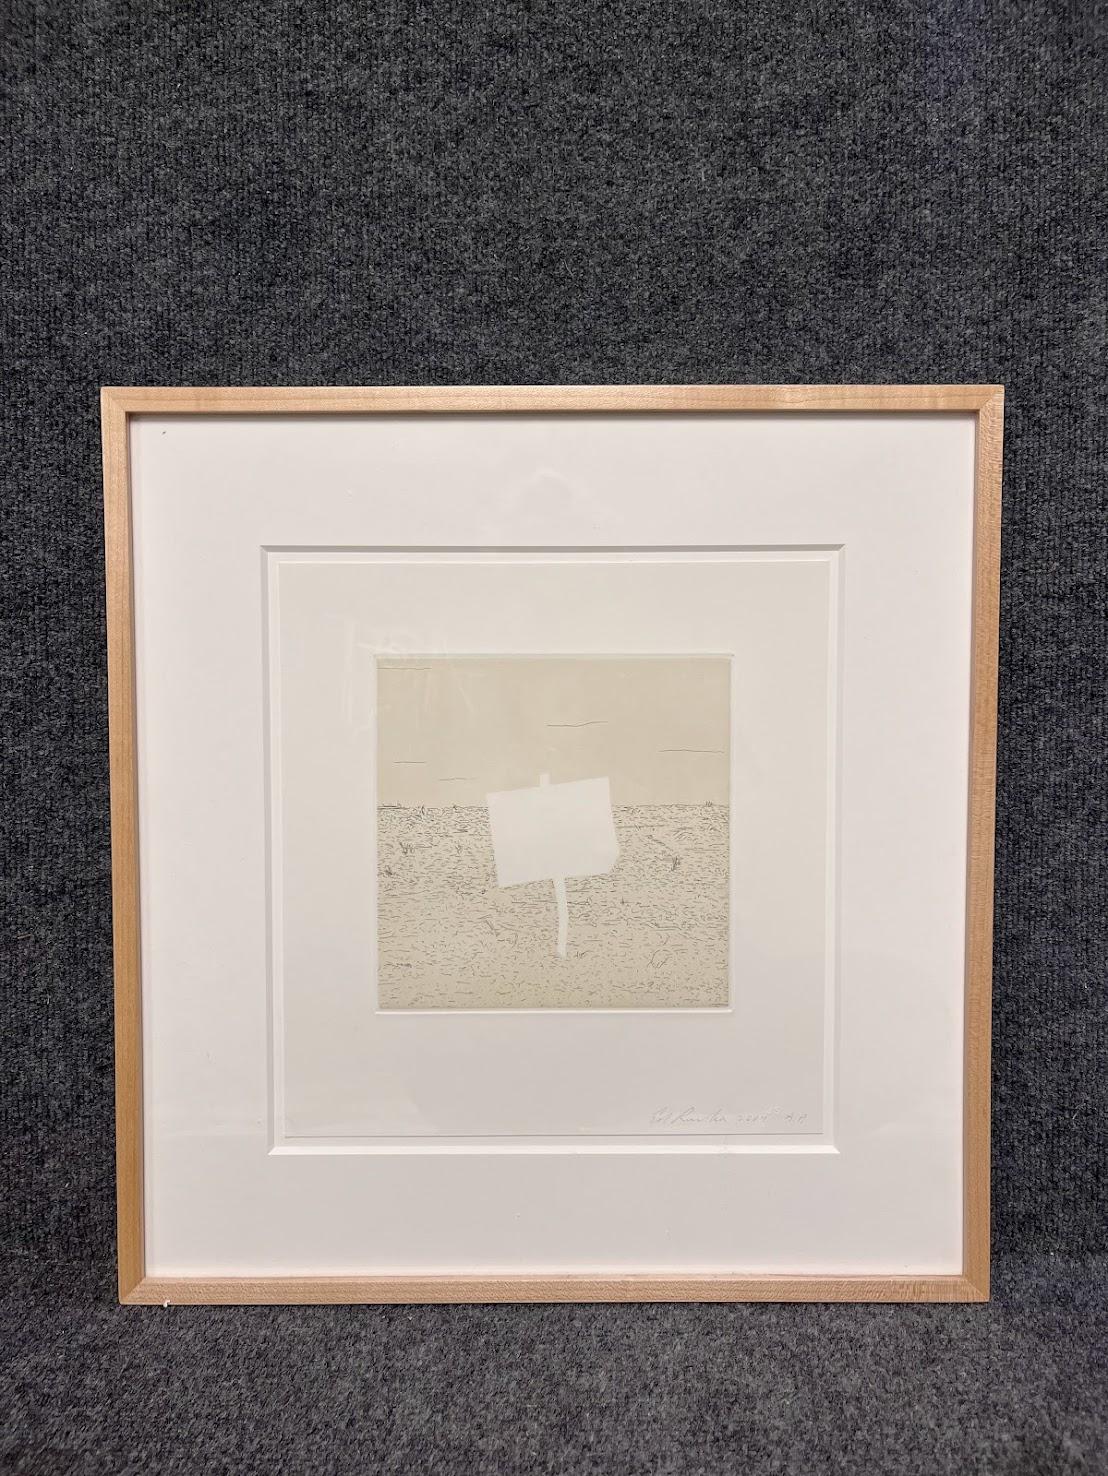 Ed Ruscha 'Blank Signs' Signed Etching and Aquatint Four Framed Prints 2004 For Sale 5